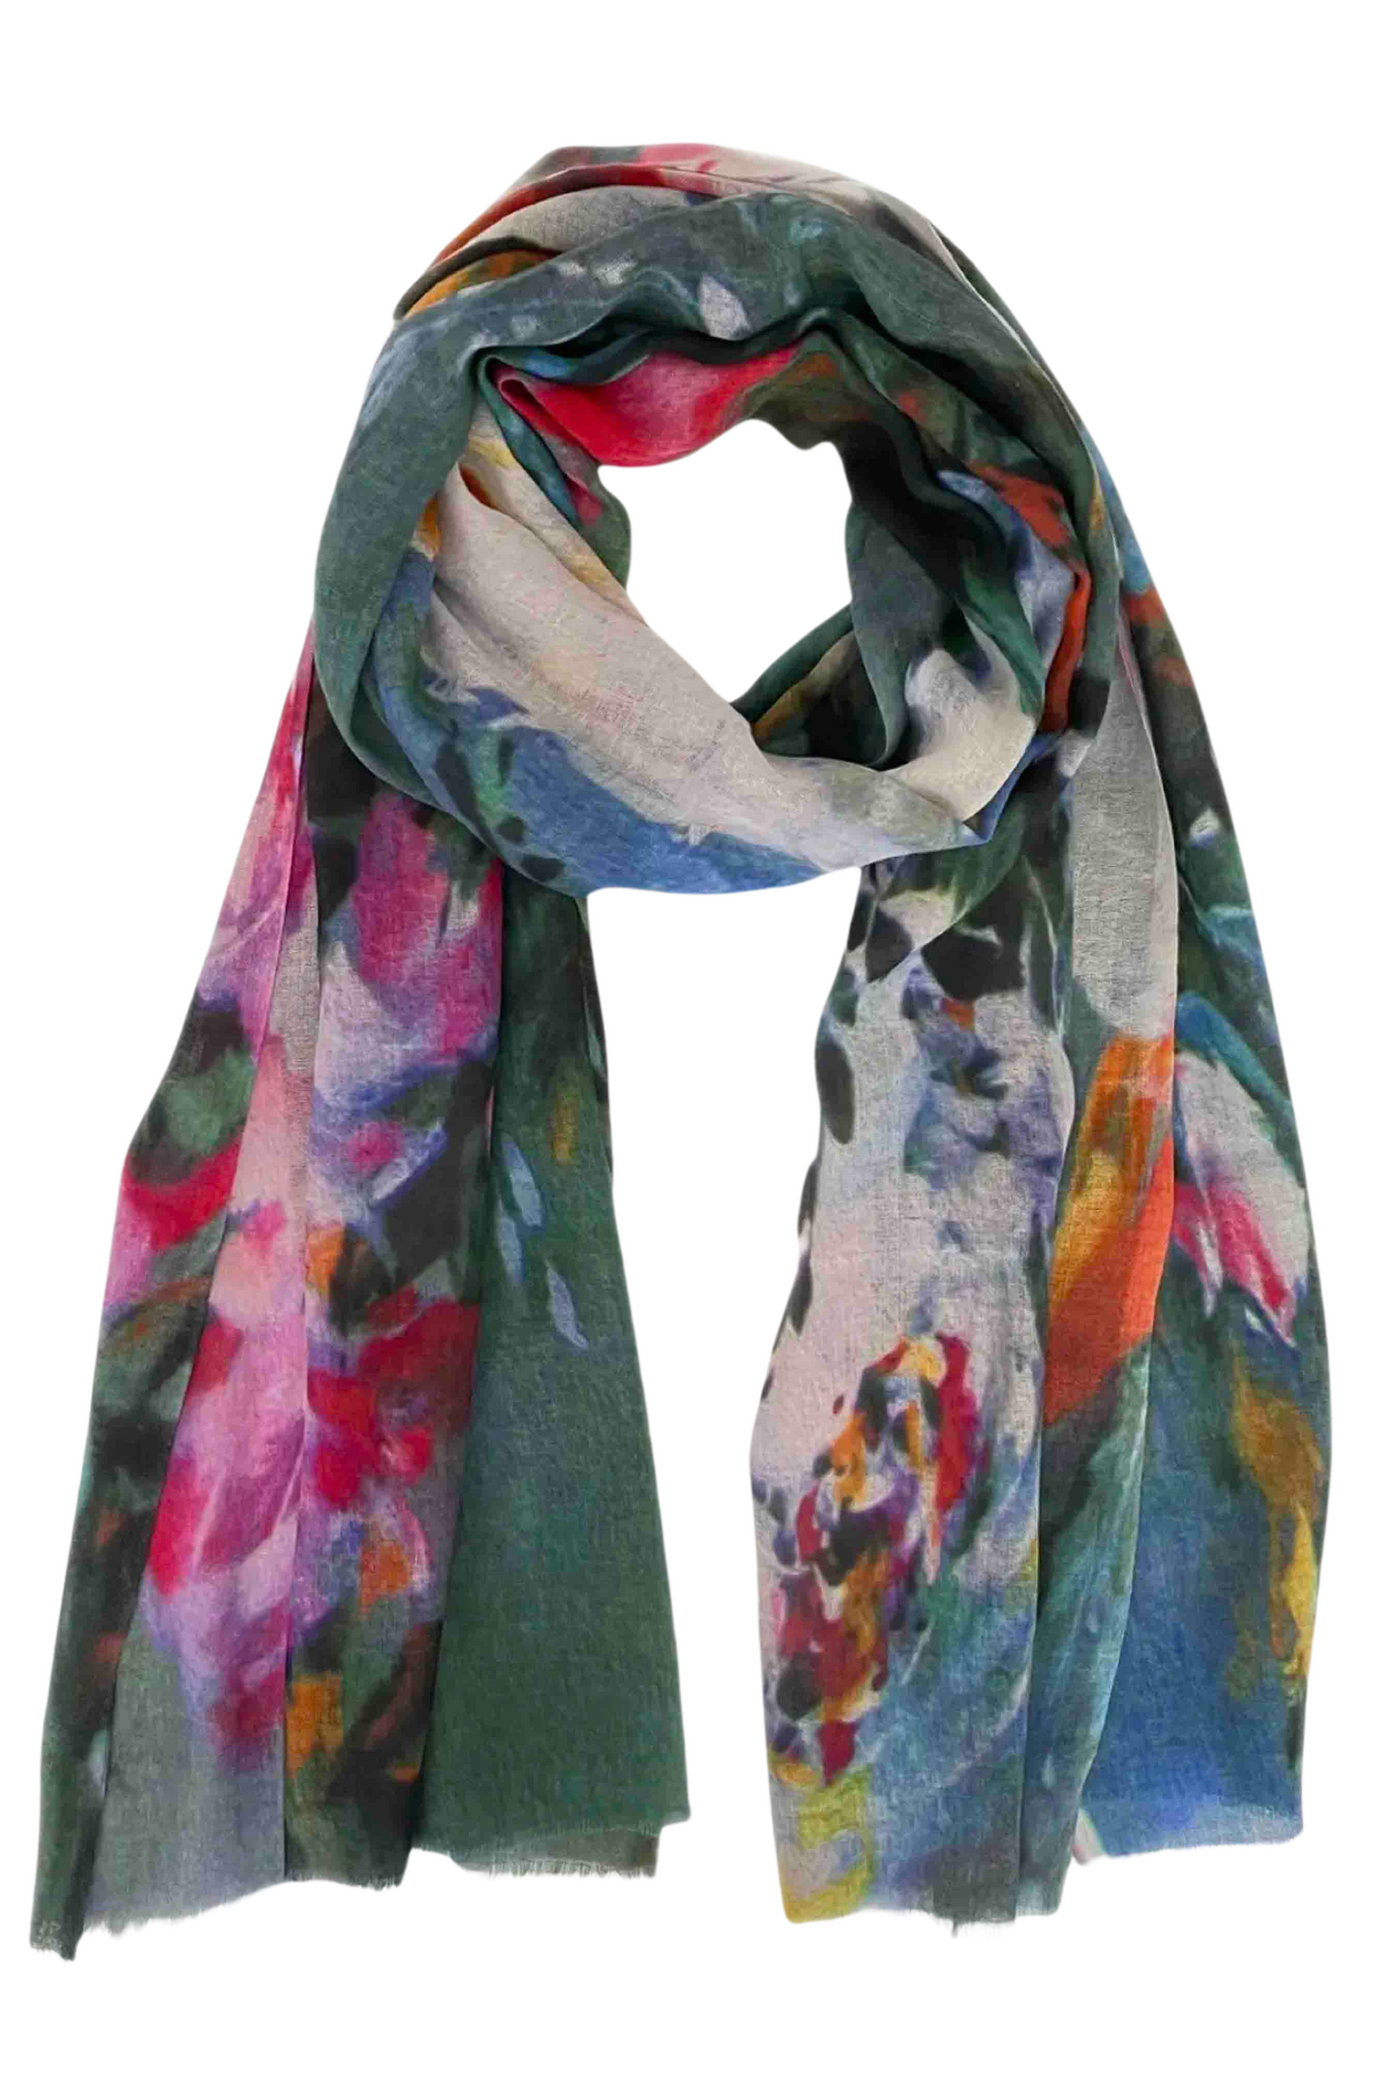 Green floral Annabelle Scarf by Chinar